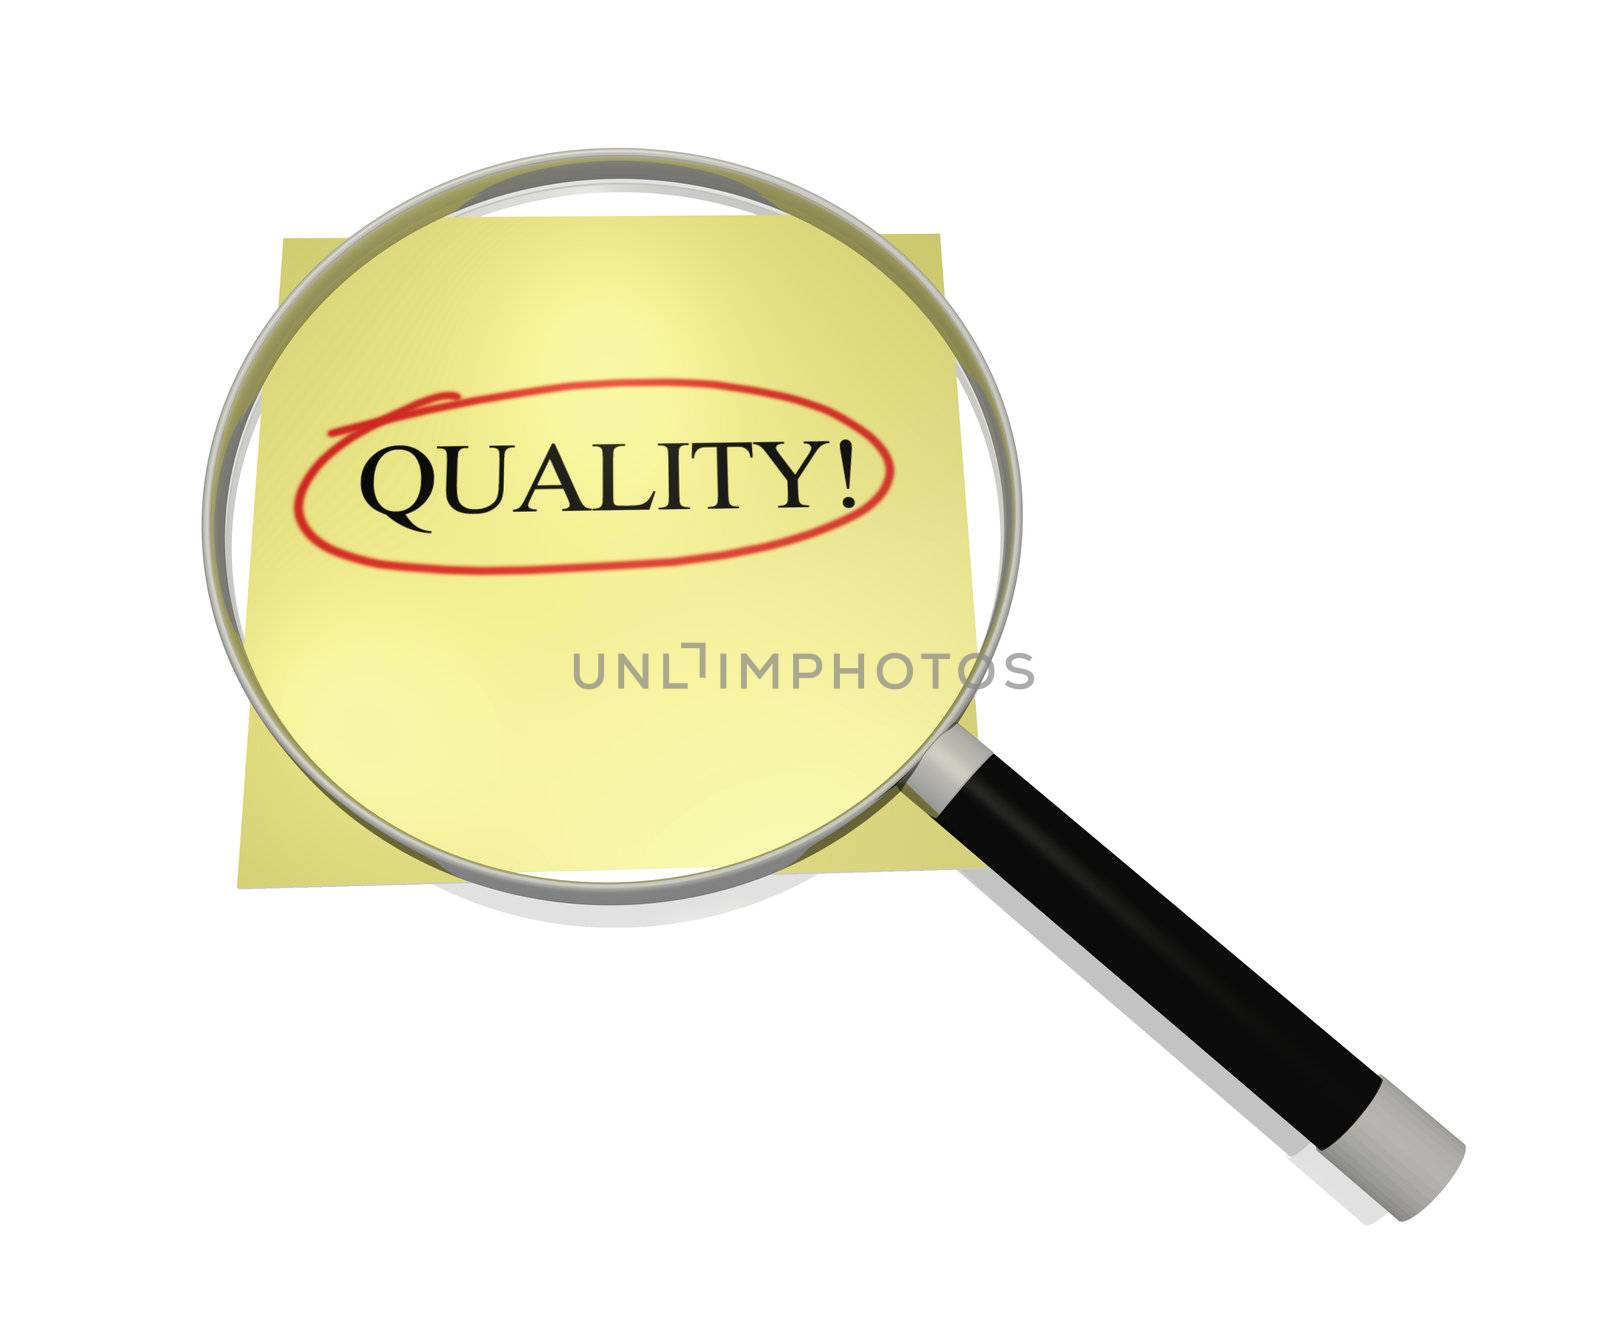 Image of a magnifying glass focusing on the word "Quality".